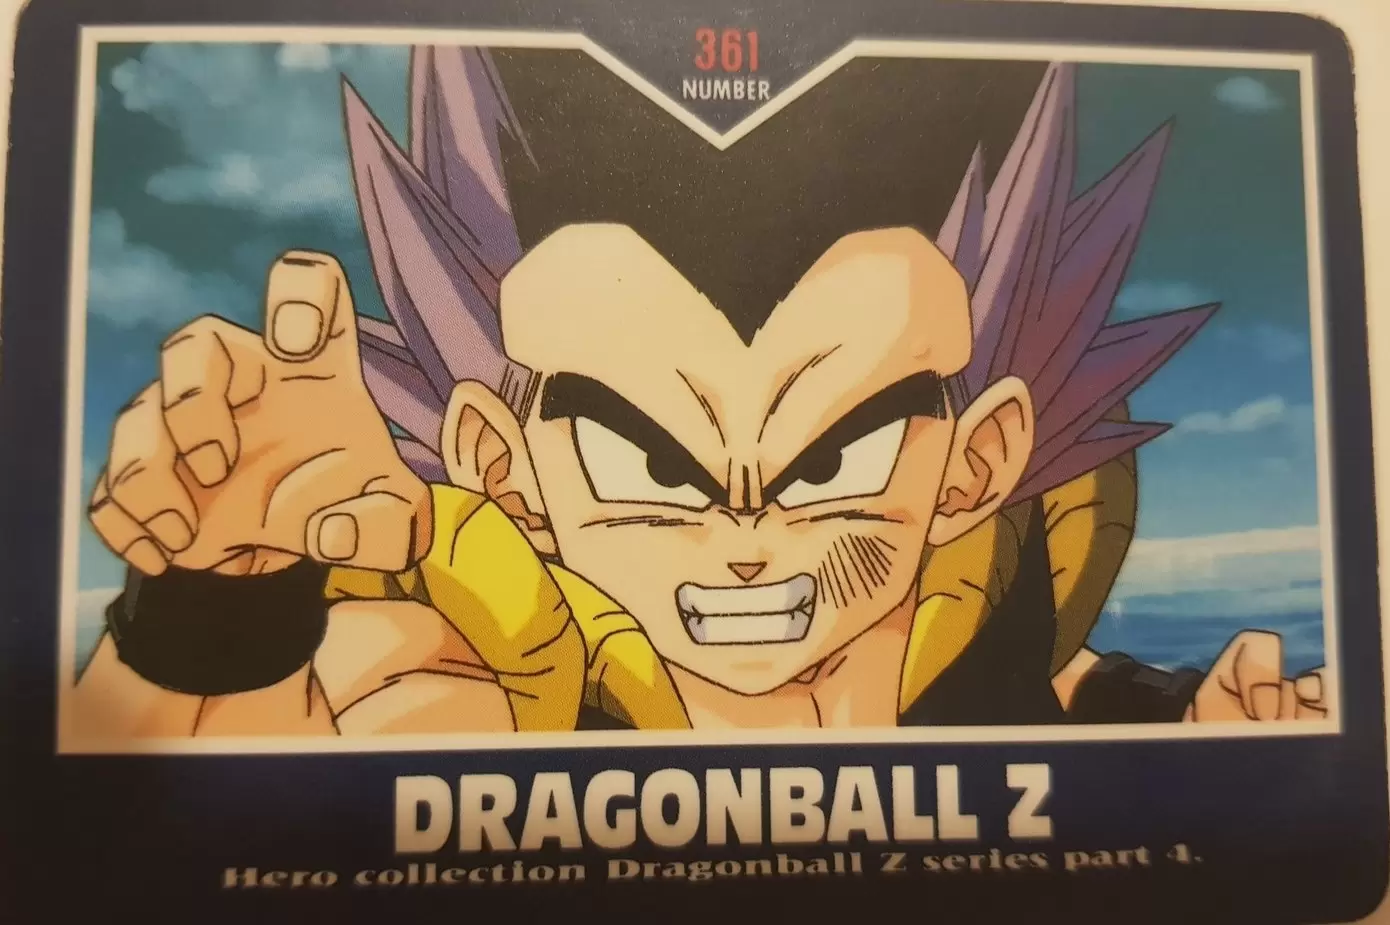 Dragon Ball Z Hero Collection Series Part 4 - Card number 361